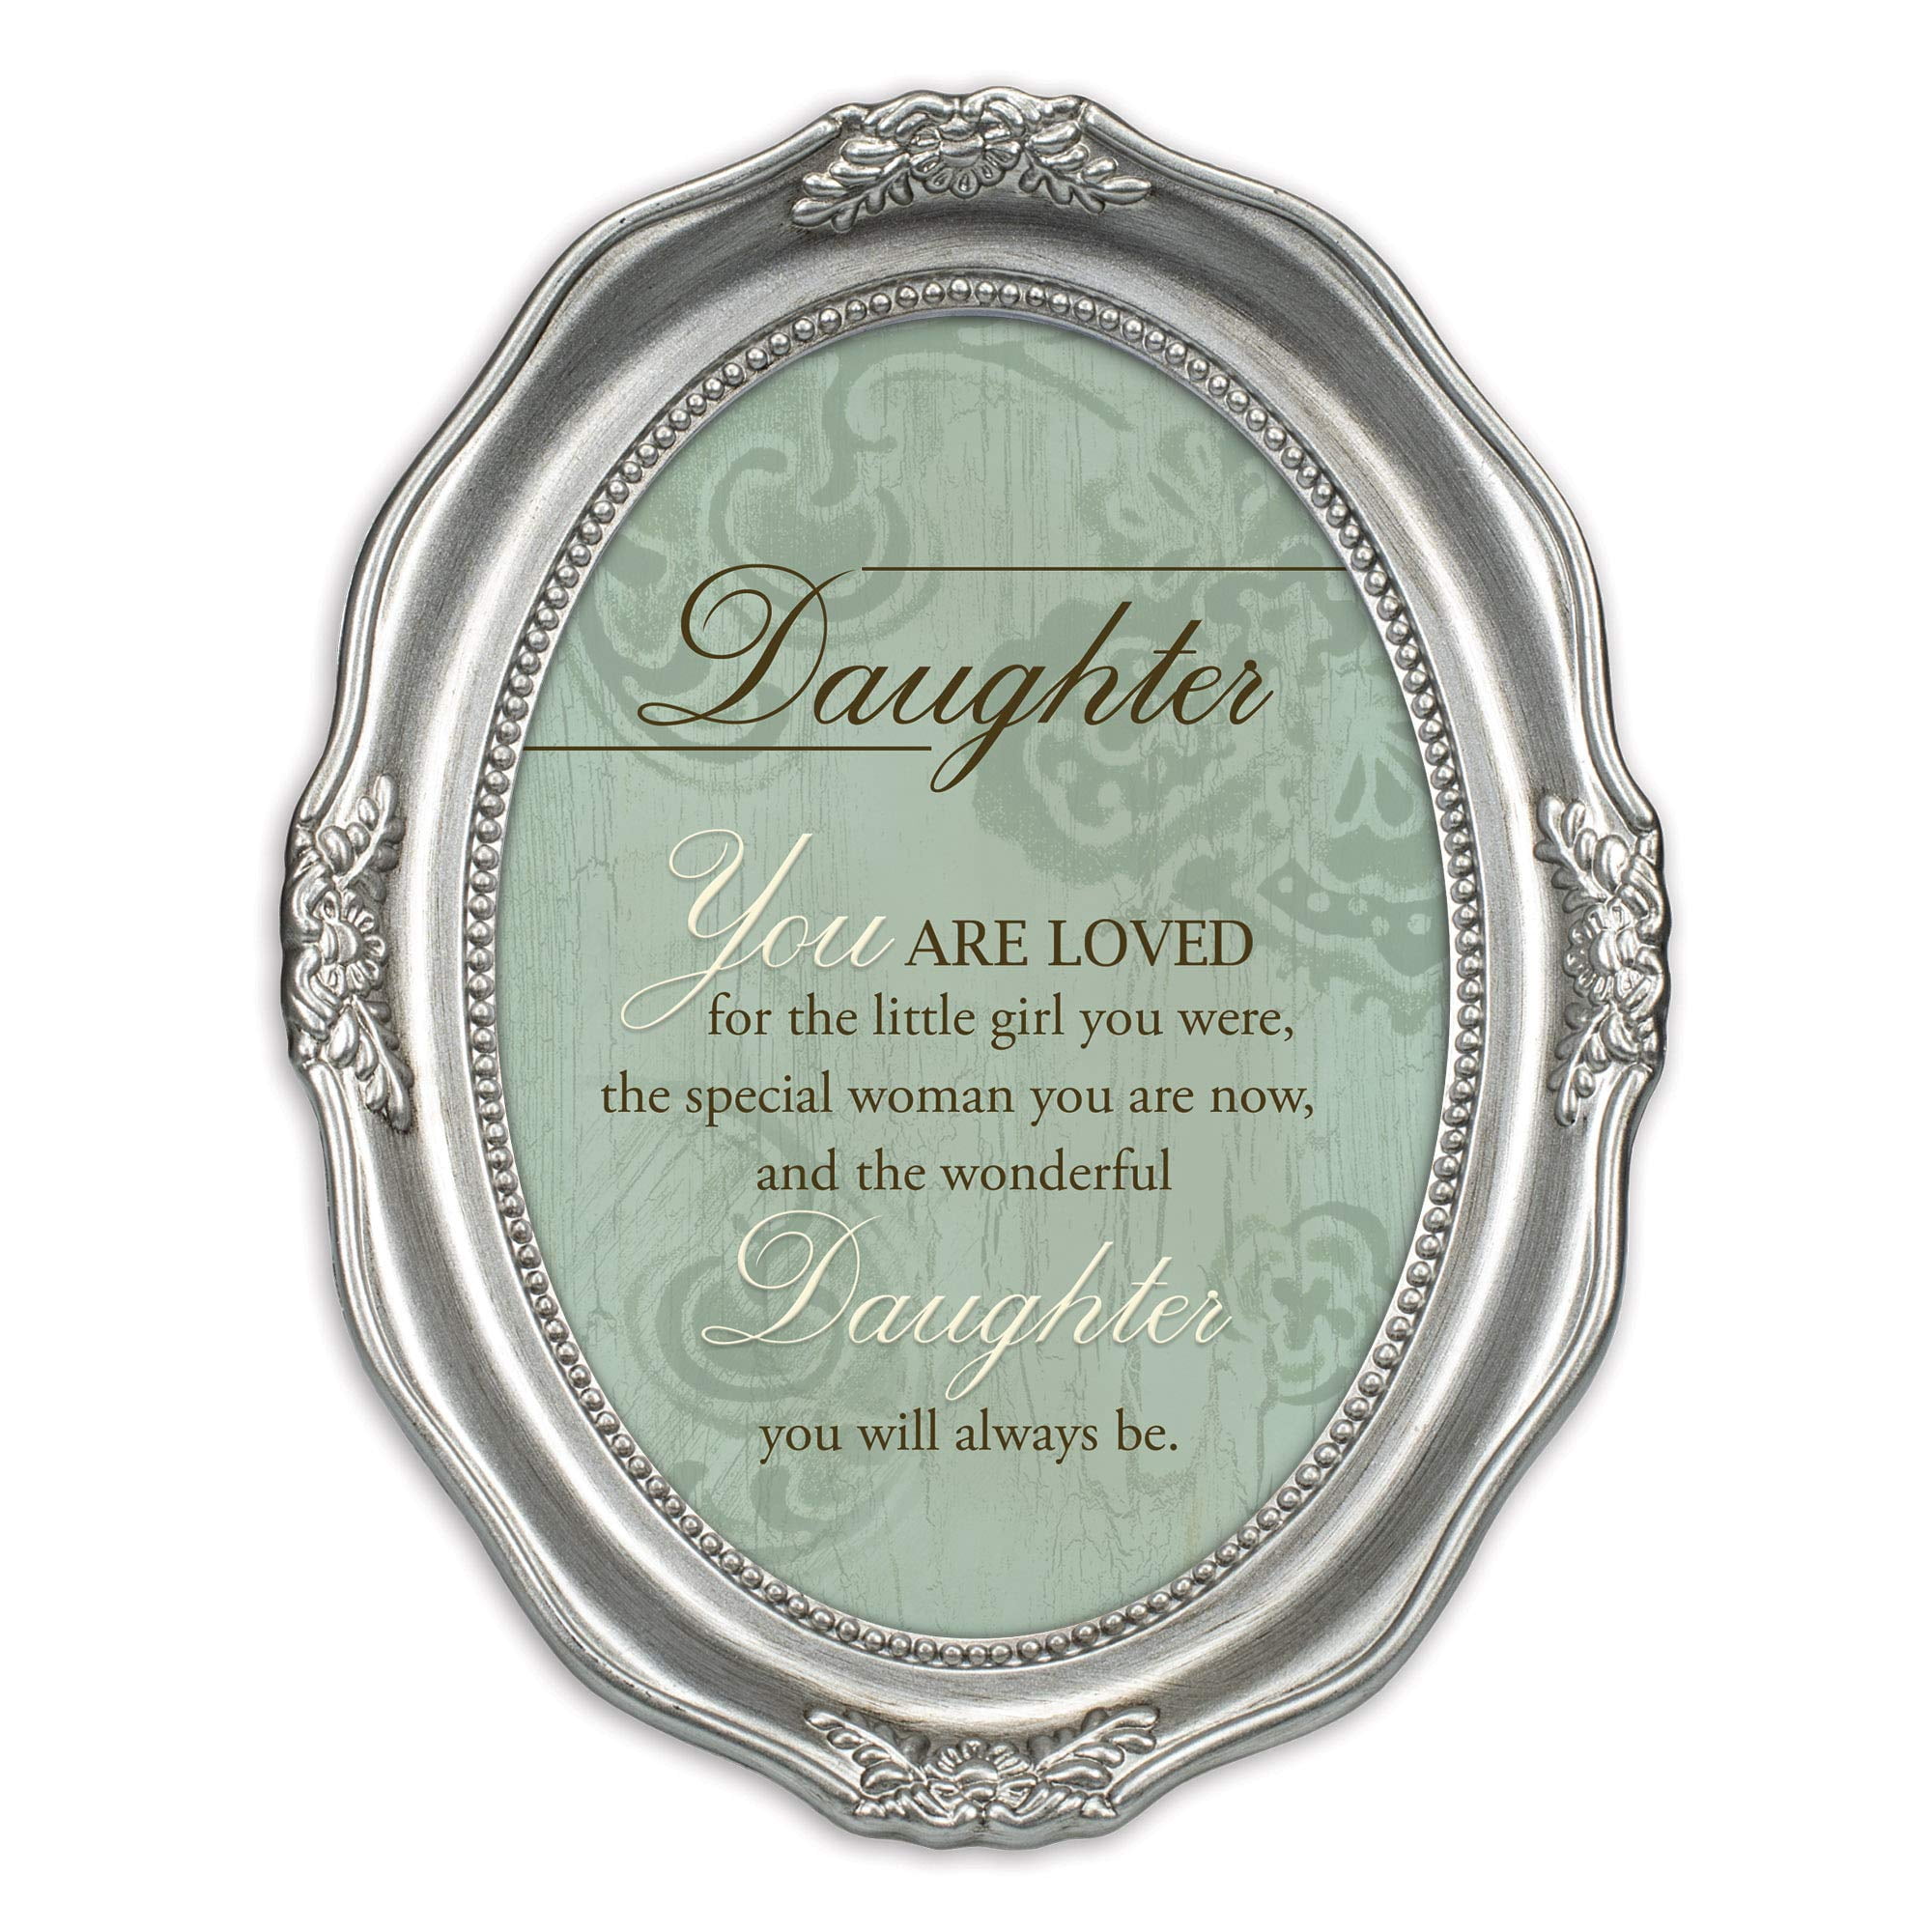 Love Him Who Calls Brushed Silver Wavy 5 x 7 Oval Table and Wall Photo Frame 